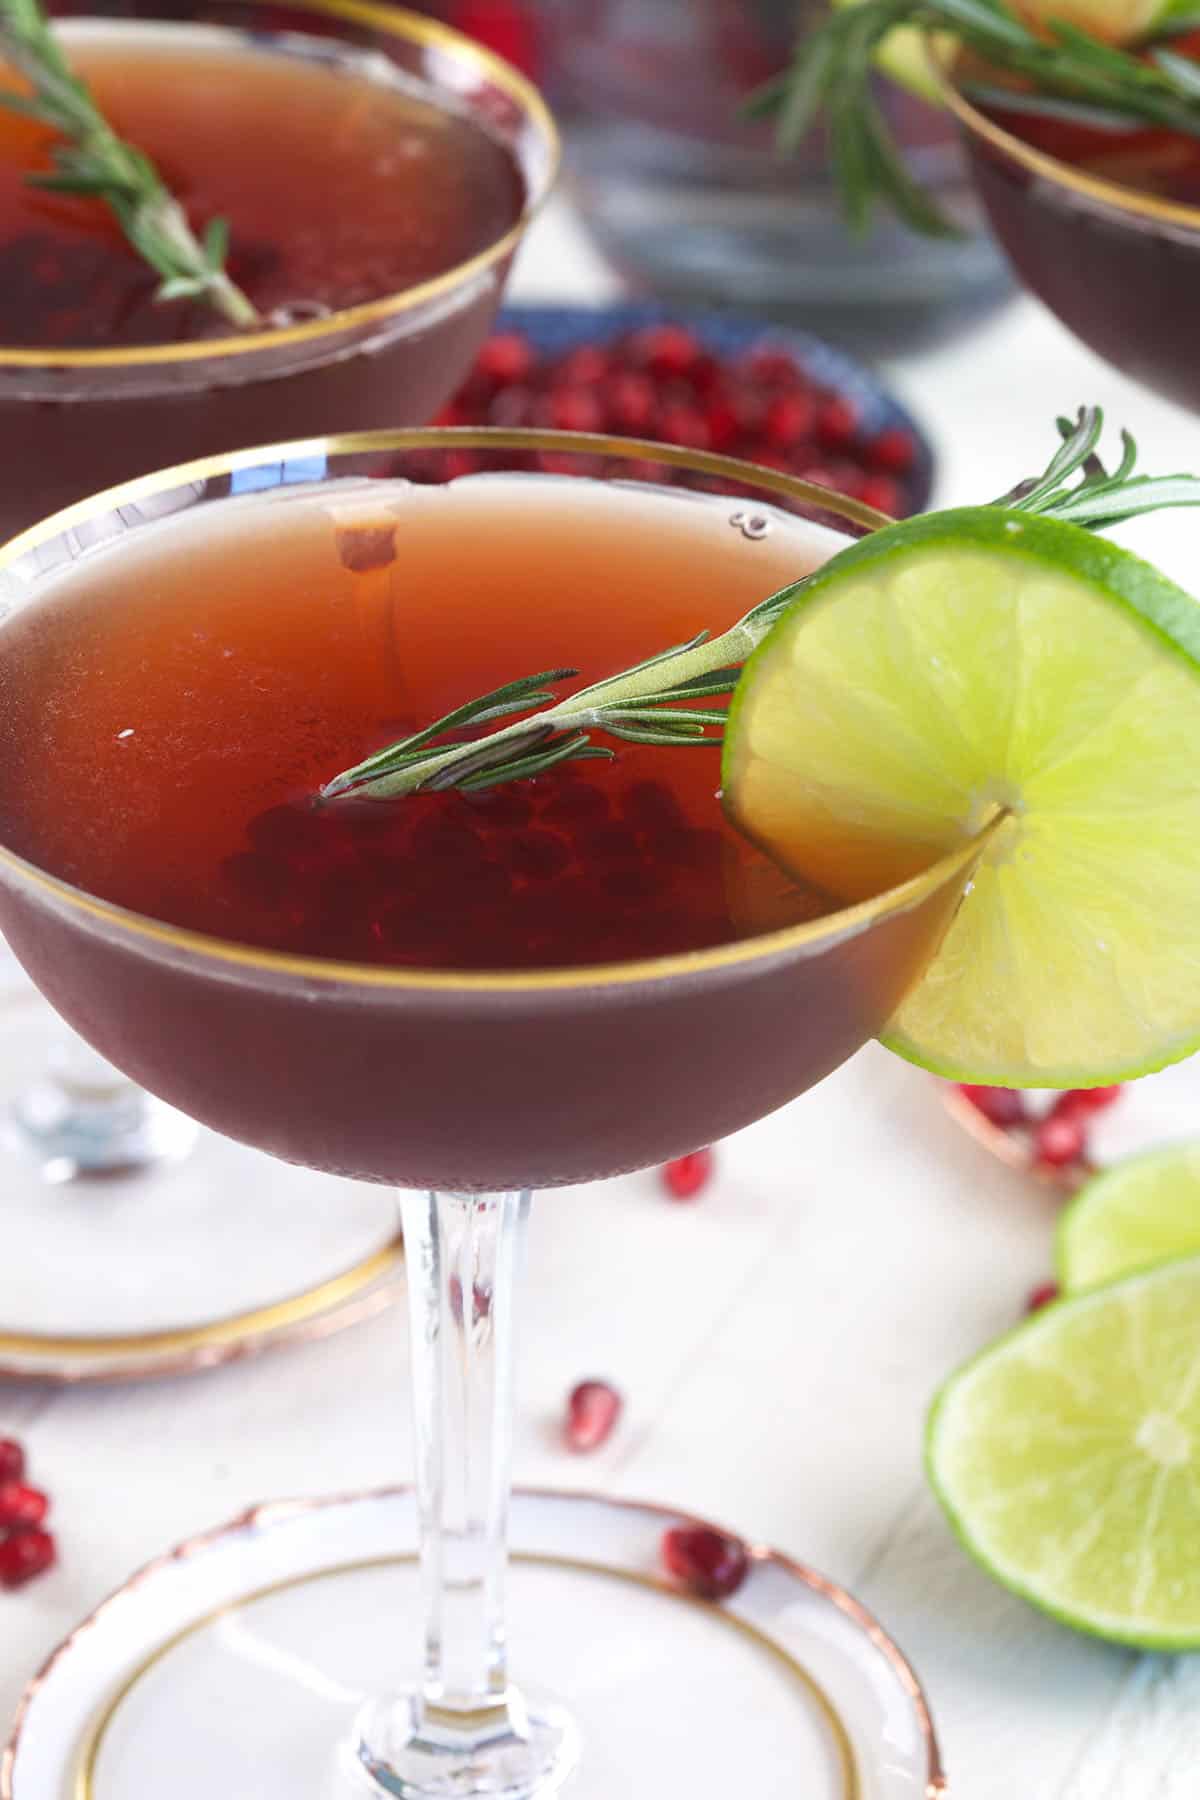 A pomegranate martini is garnished with herbs and a slice of lime.